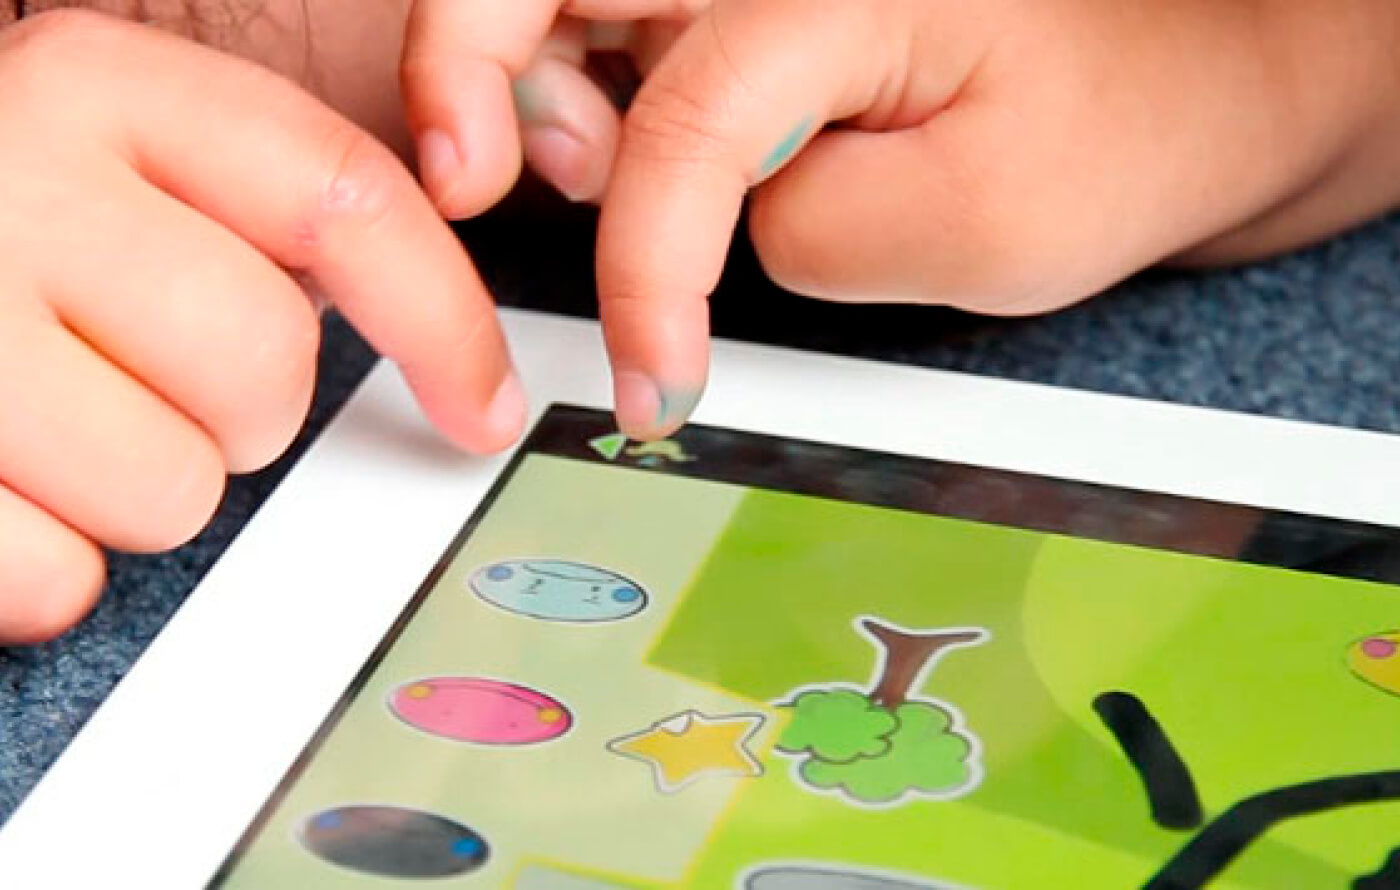 Close up image of two children's fingers tapping on part of the game on an iPad screen